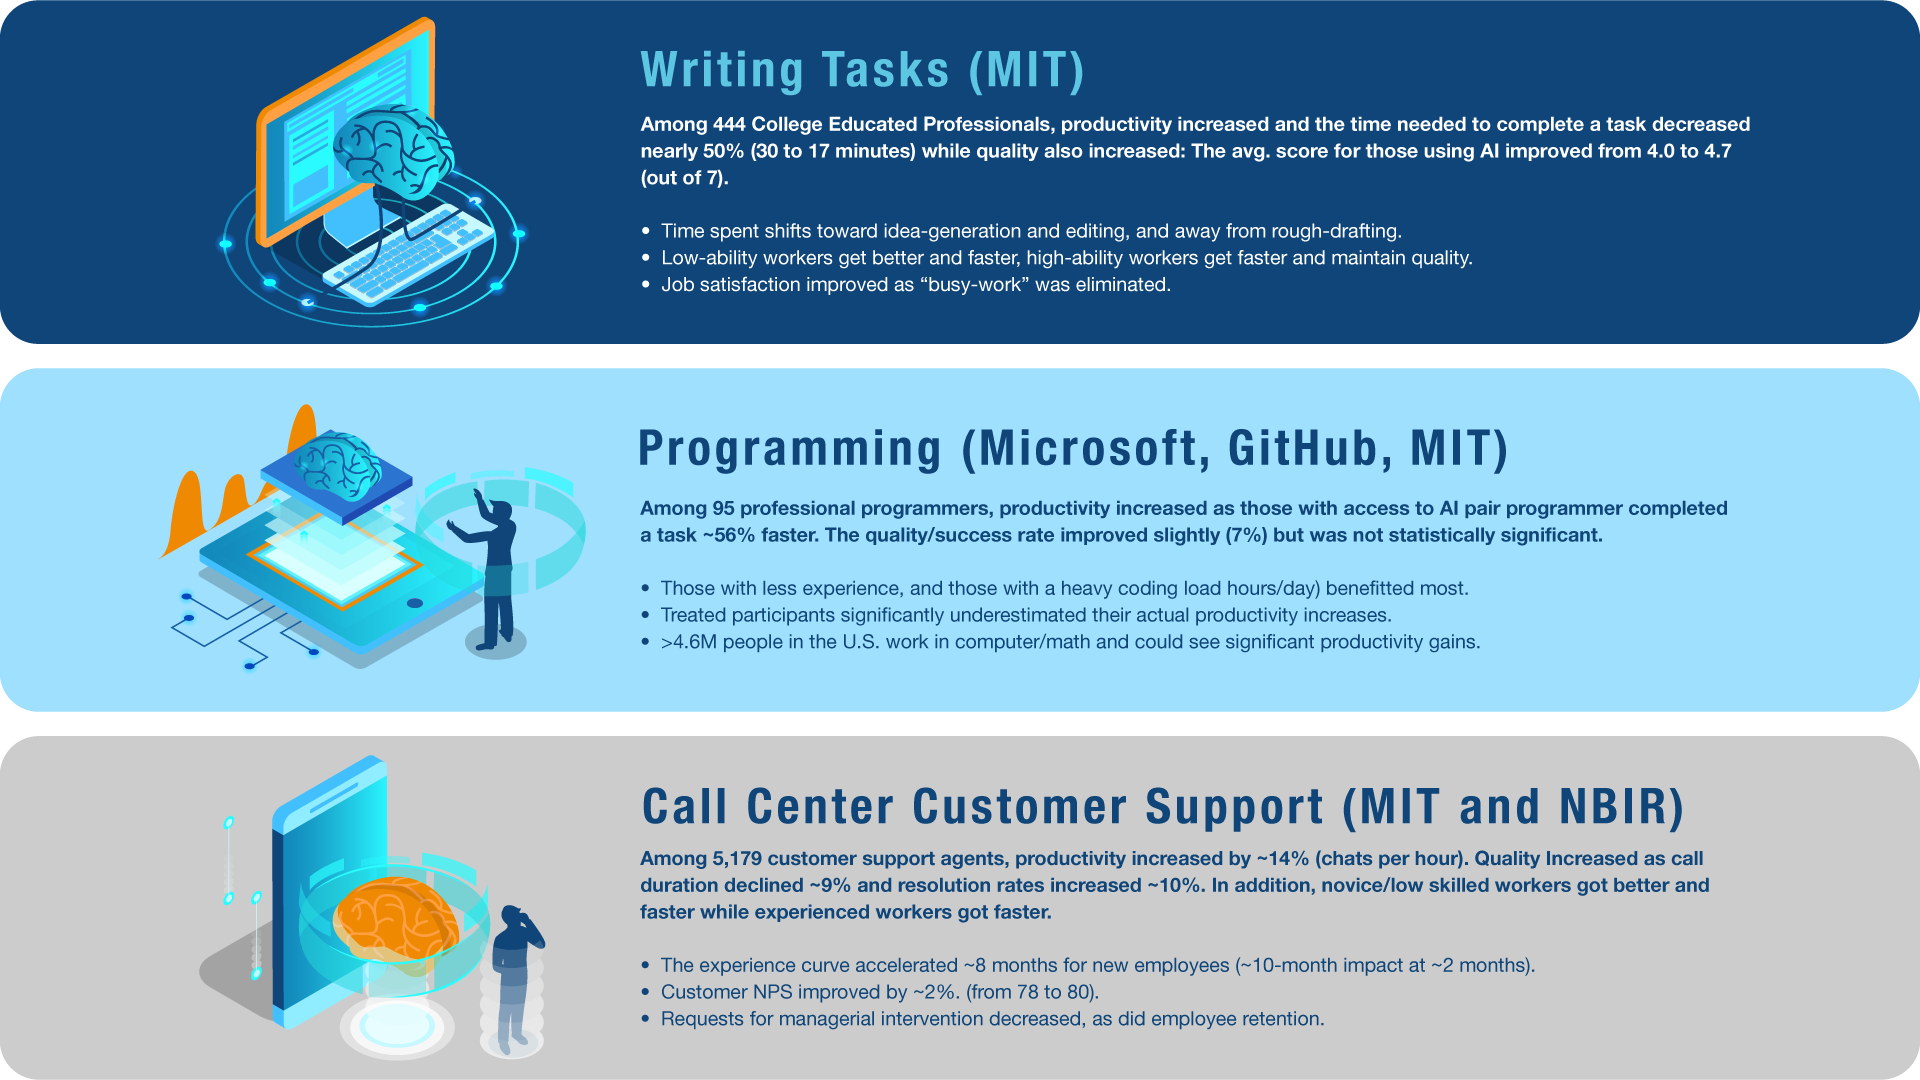 The early positive impacts of AI for organizations. (1) Writing tasks (MIT), (2) Programming (Microsoft, GitHub, MIT), (3) Call center support (MIT, NBIB).